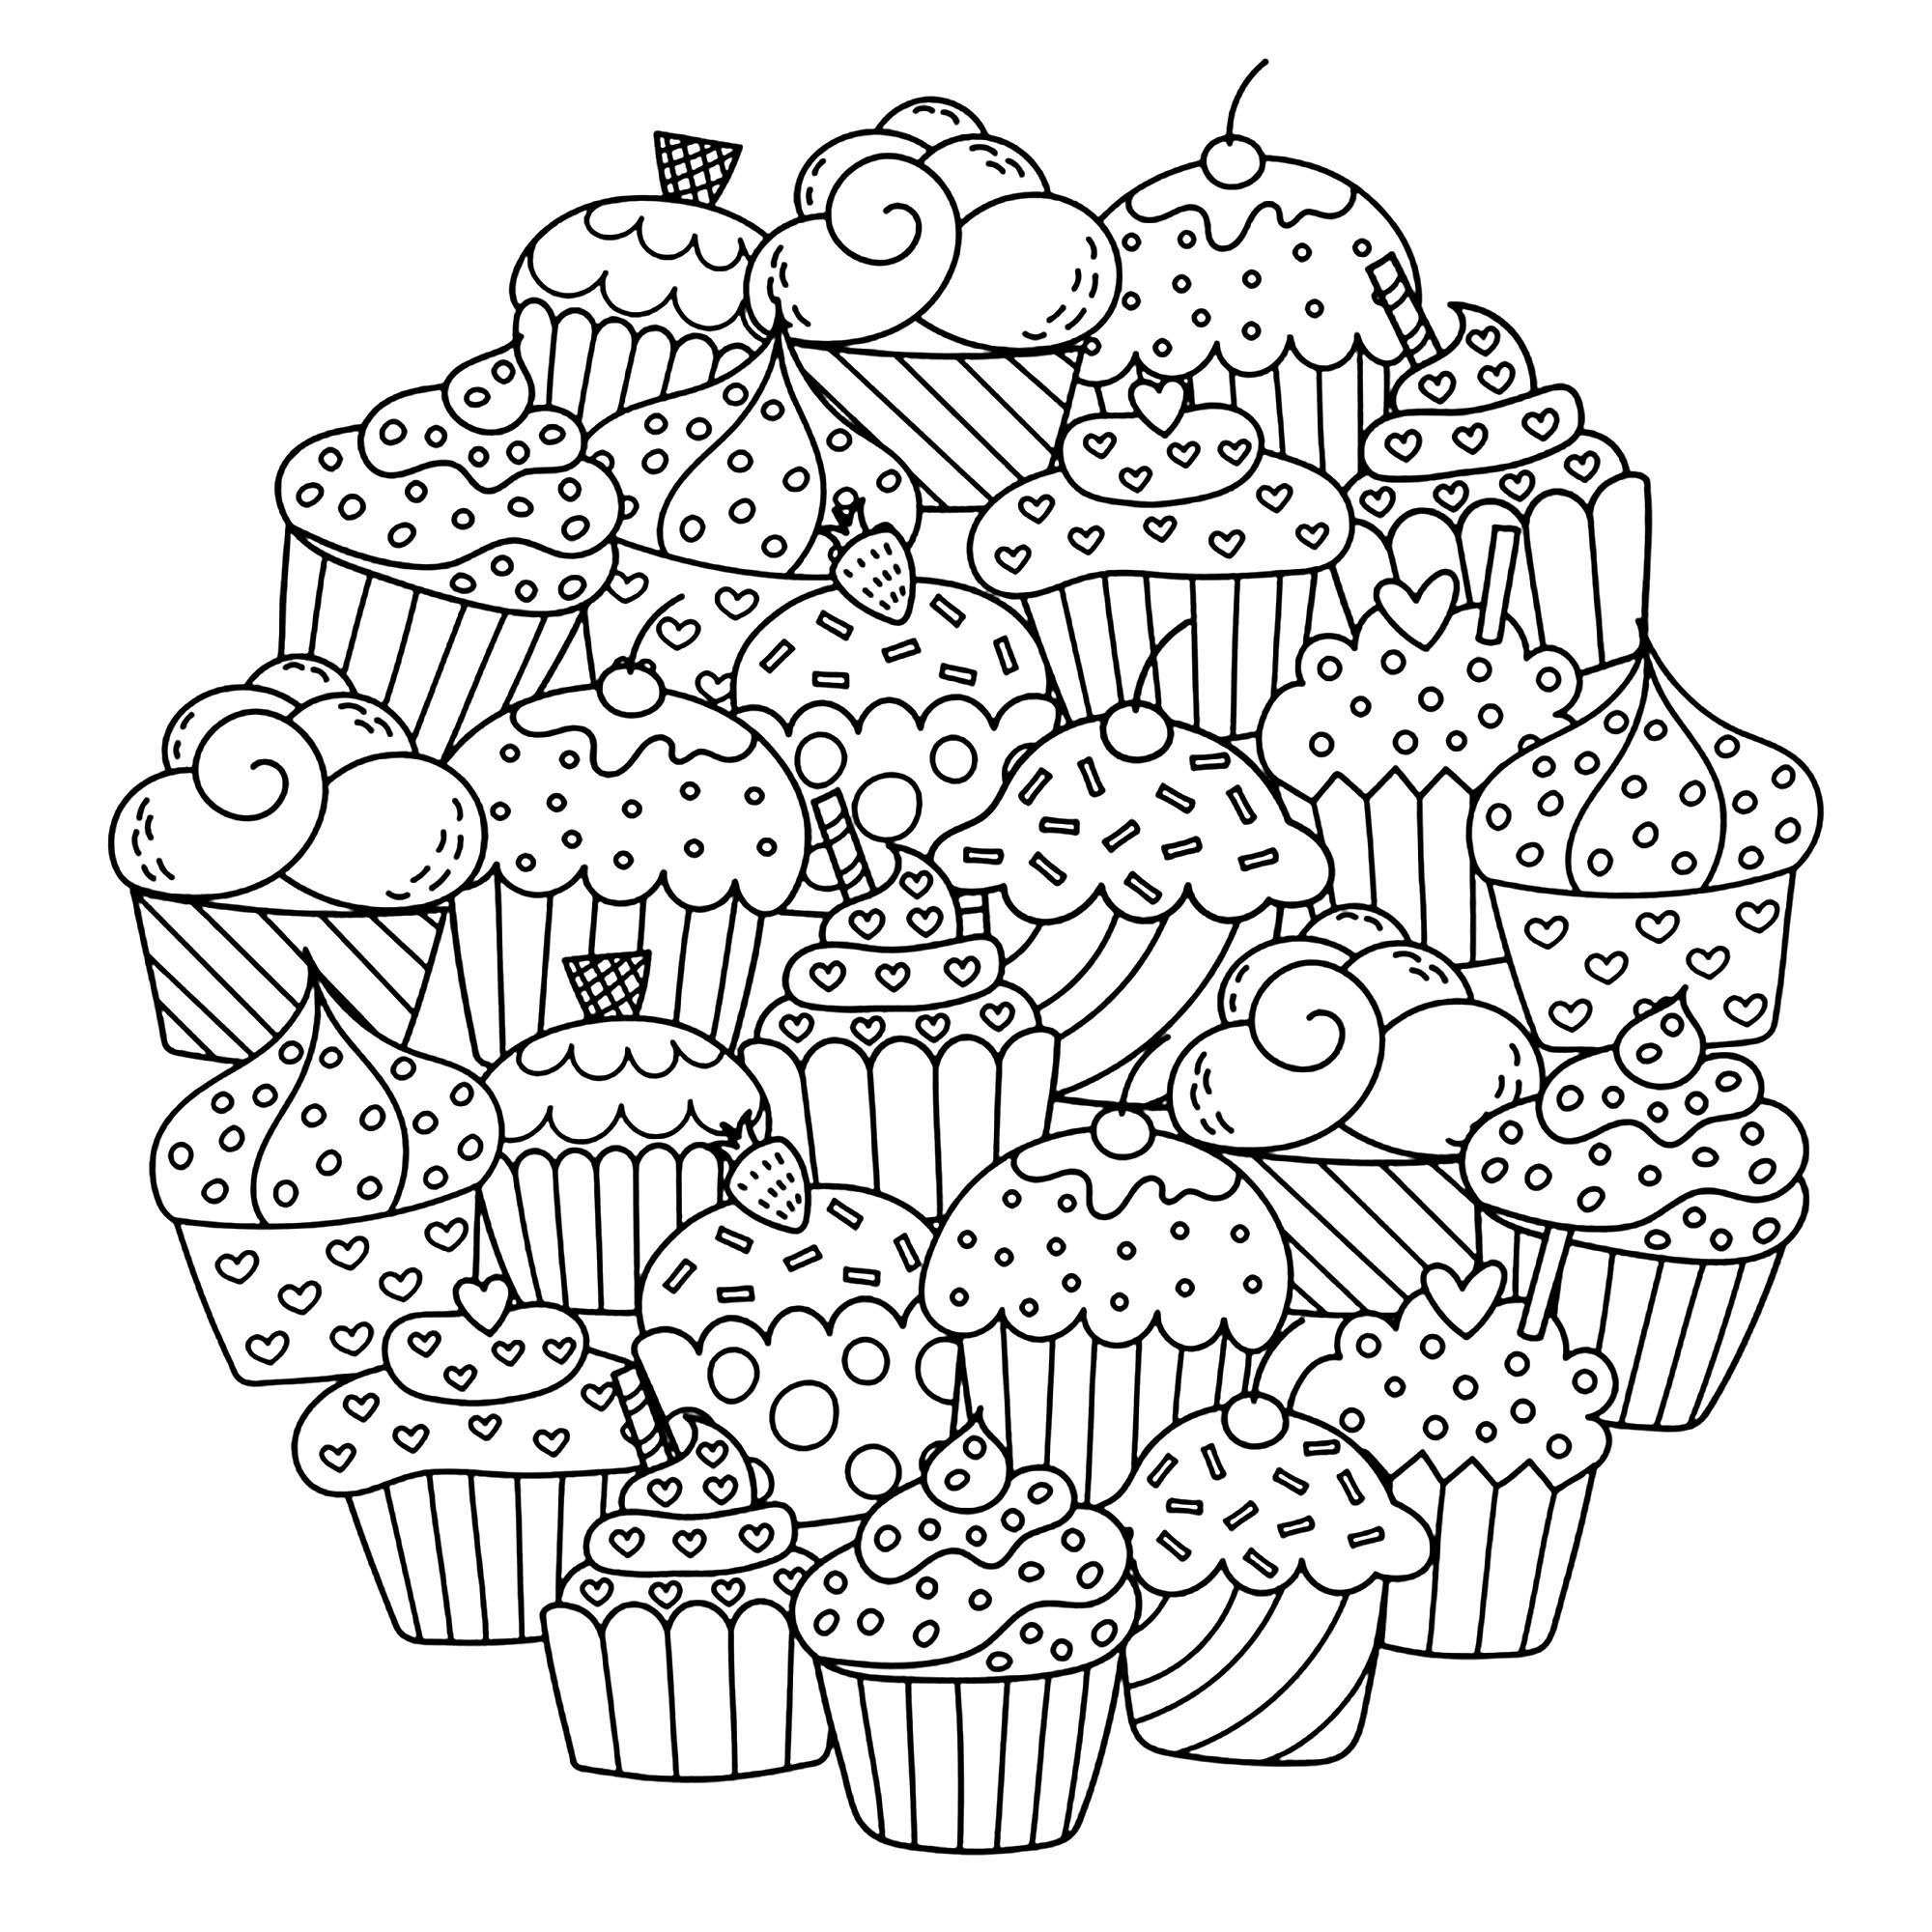 Color these delicious cupcakes composing this beautiful Mandala ... Add your favorite colors !, Artist : Gulnara Sabirova   Source : 123rf